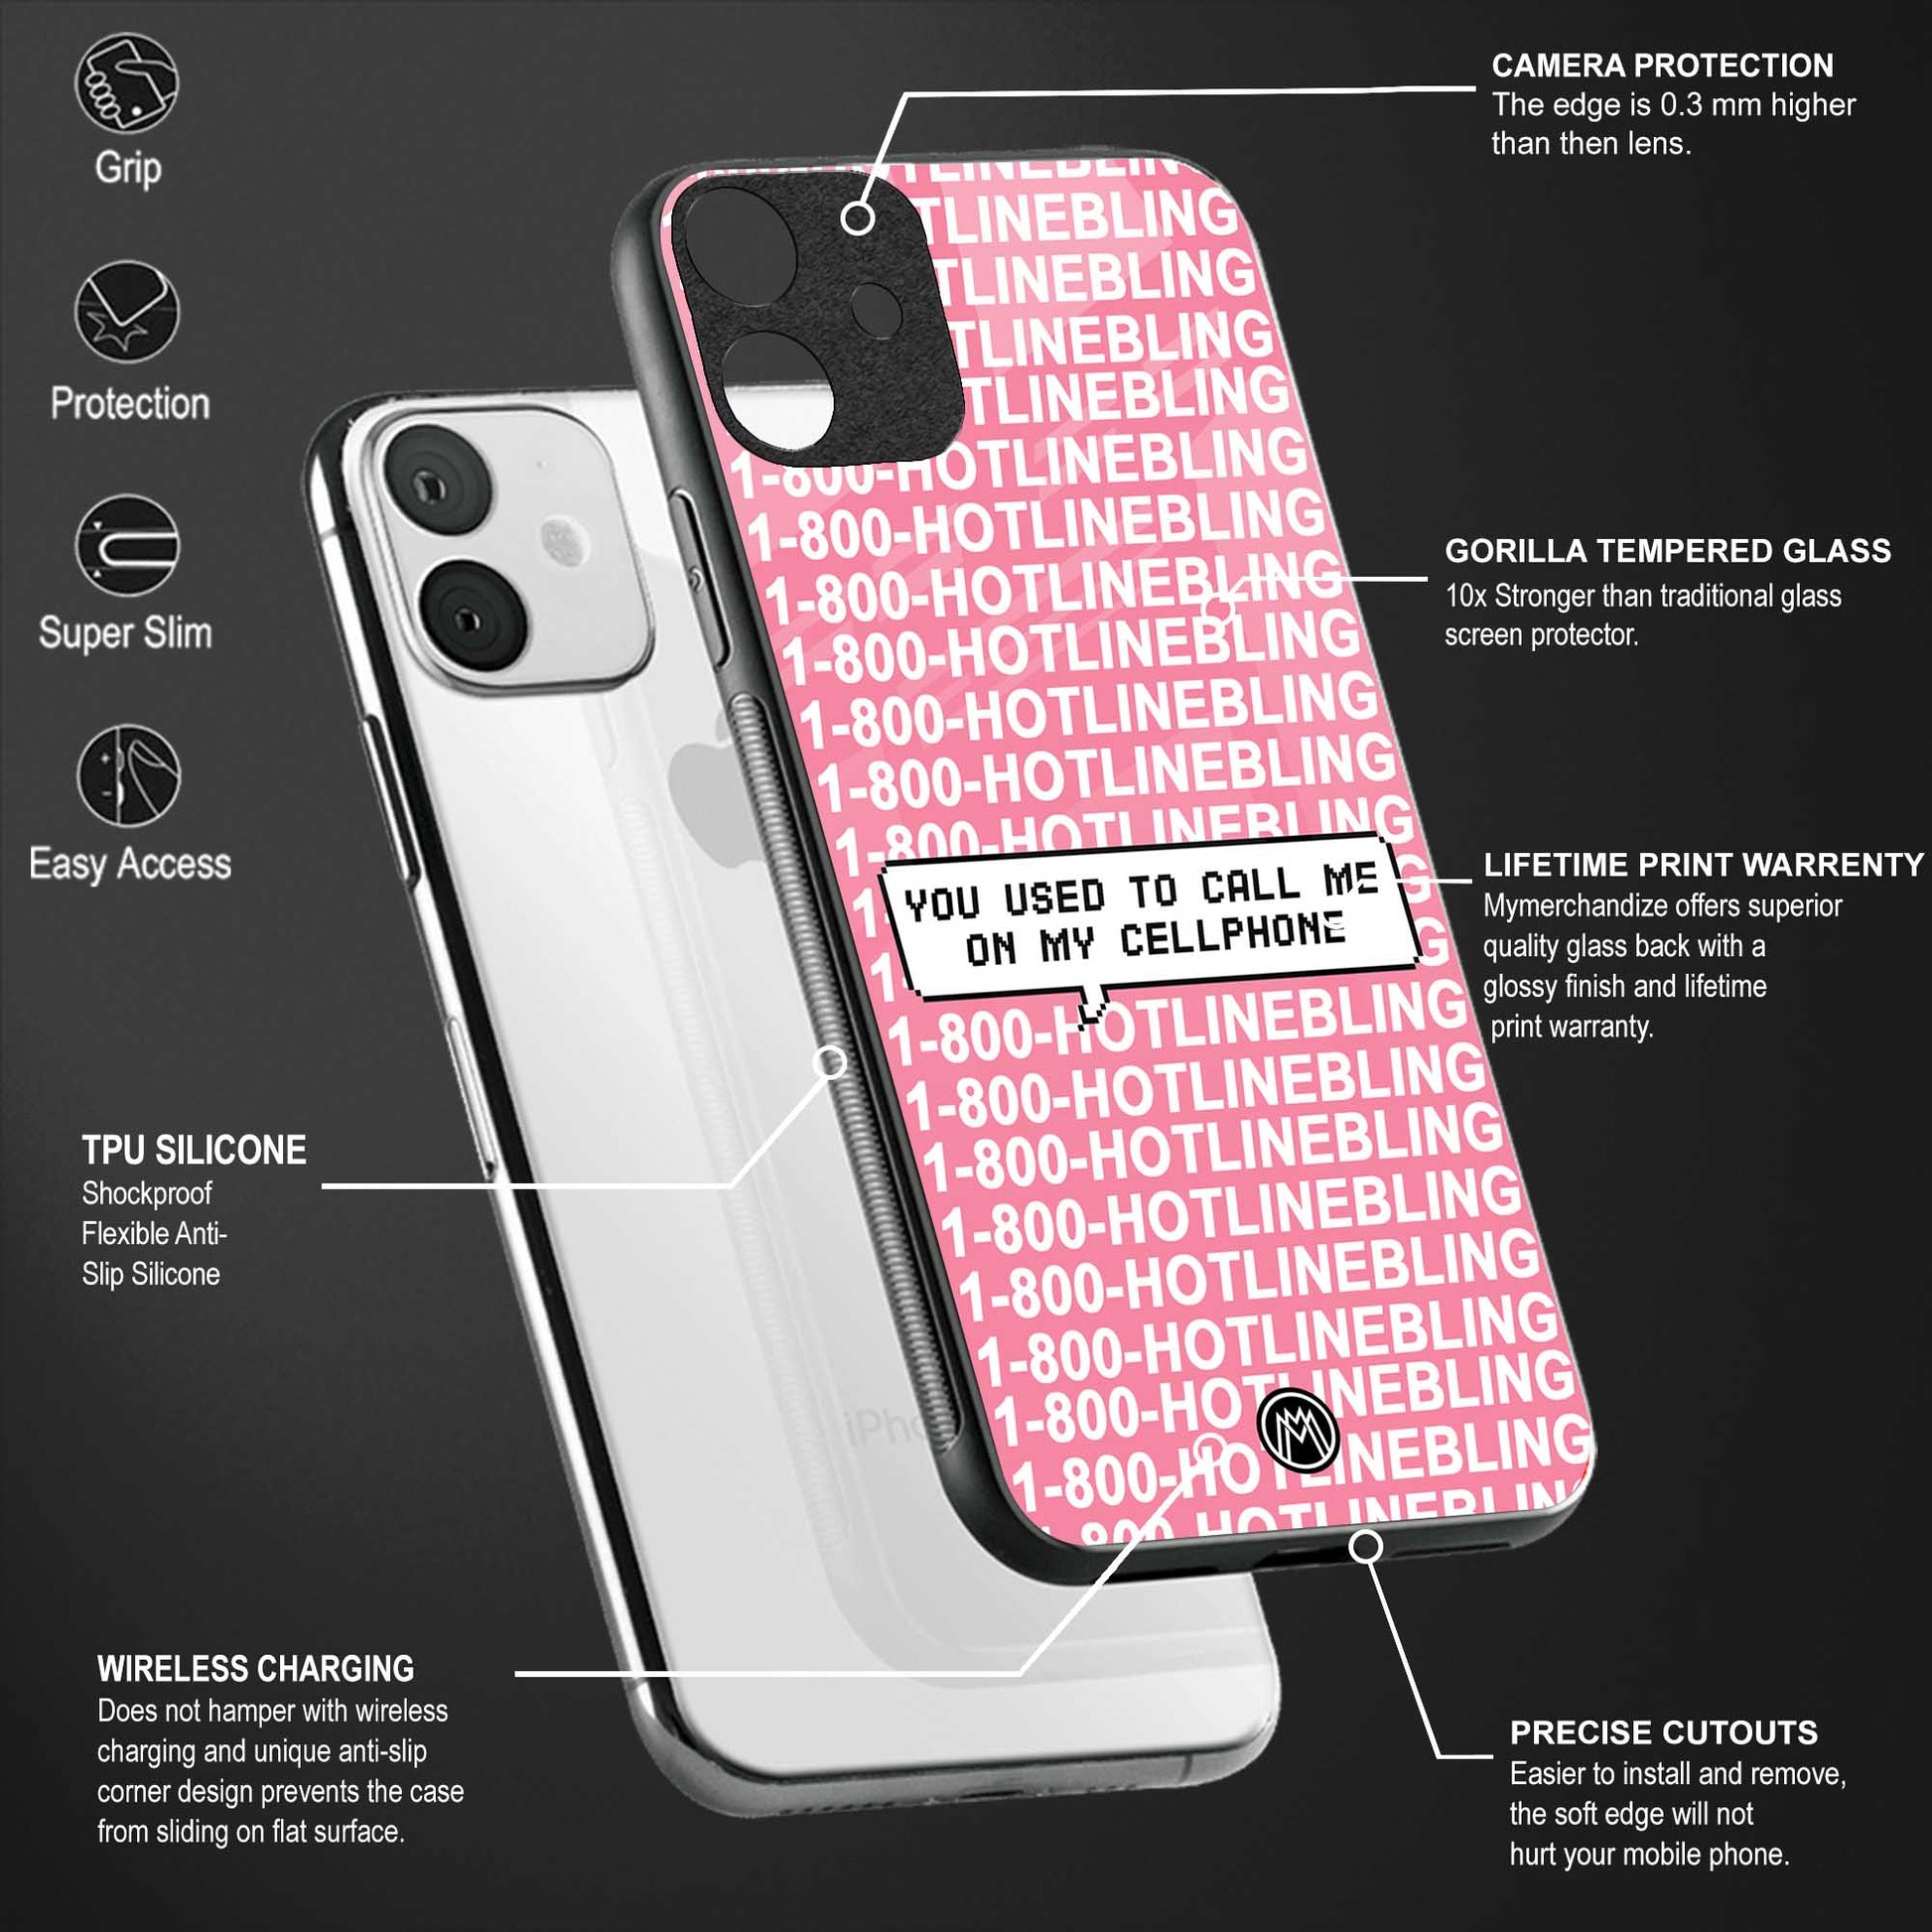 1800 hotline bling phone cover for redmi note 9 